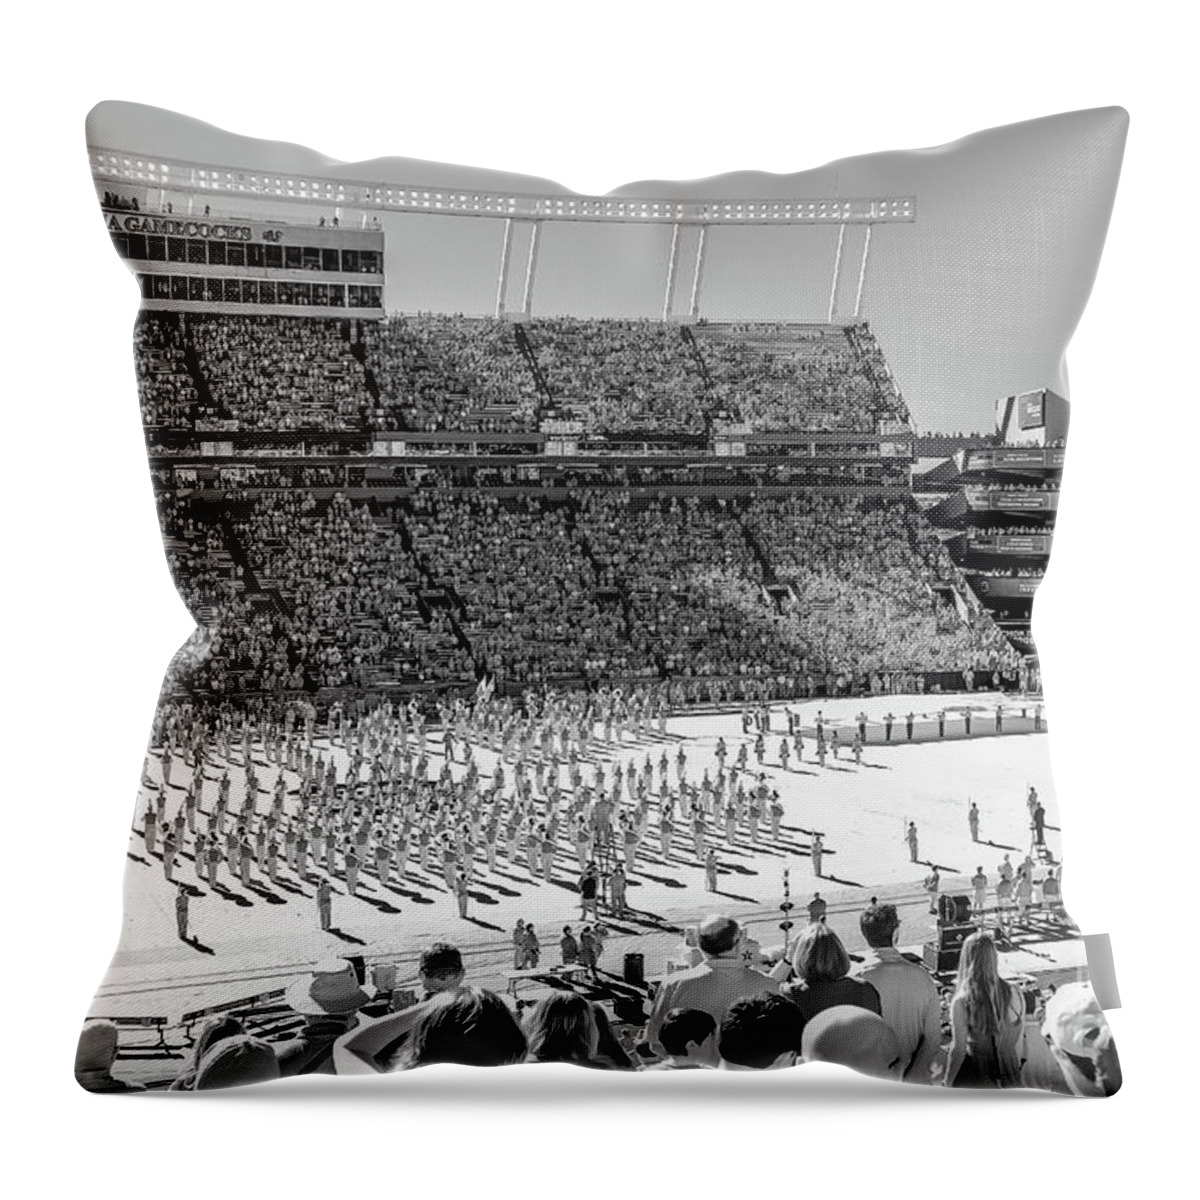 Usc Throw Pillow featuring the photograph Williams - Brice Stadium #29 by Charles Hite